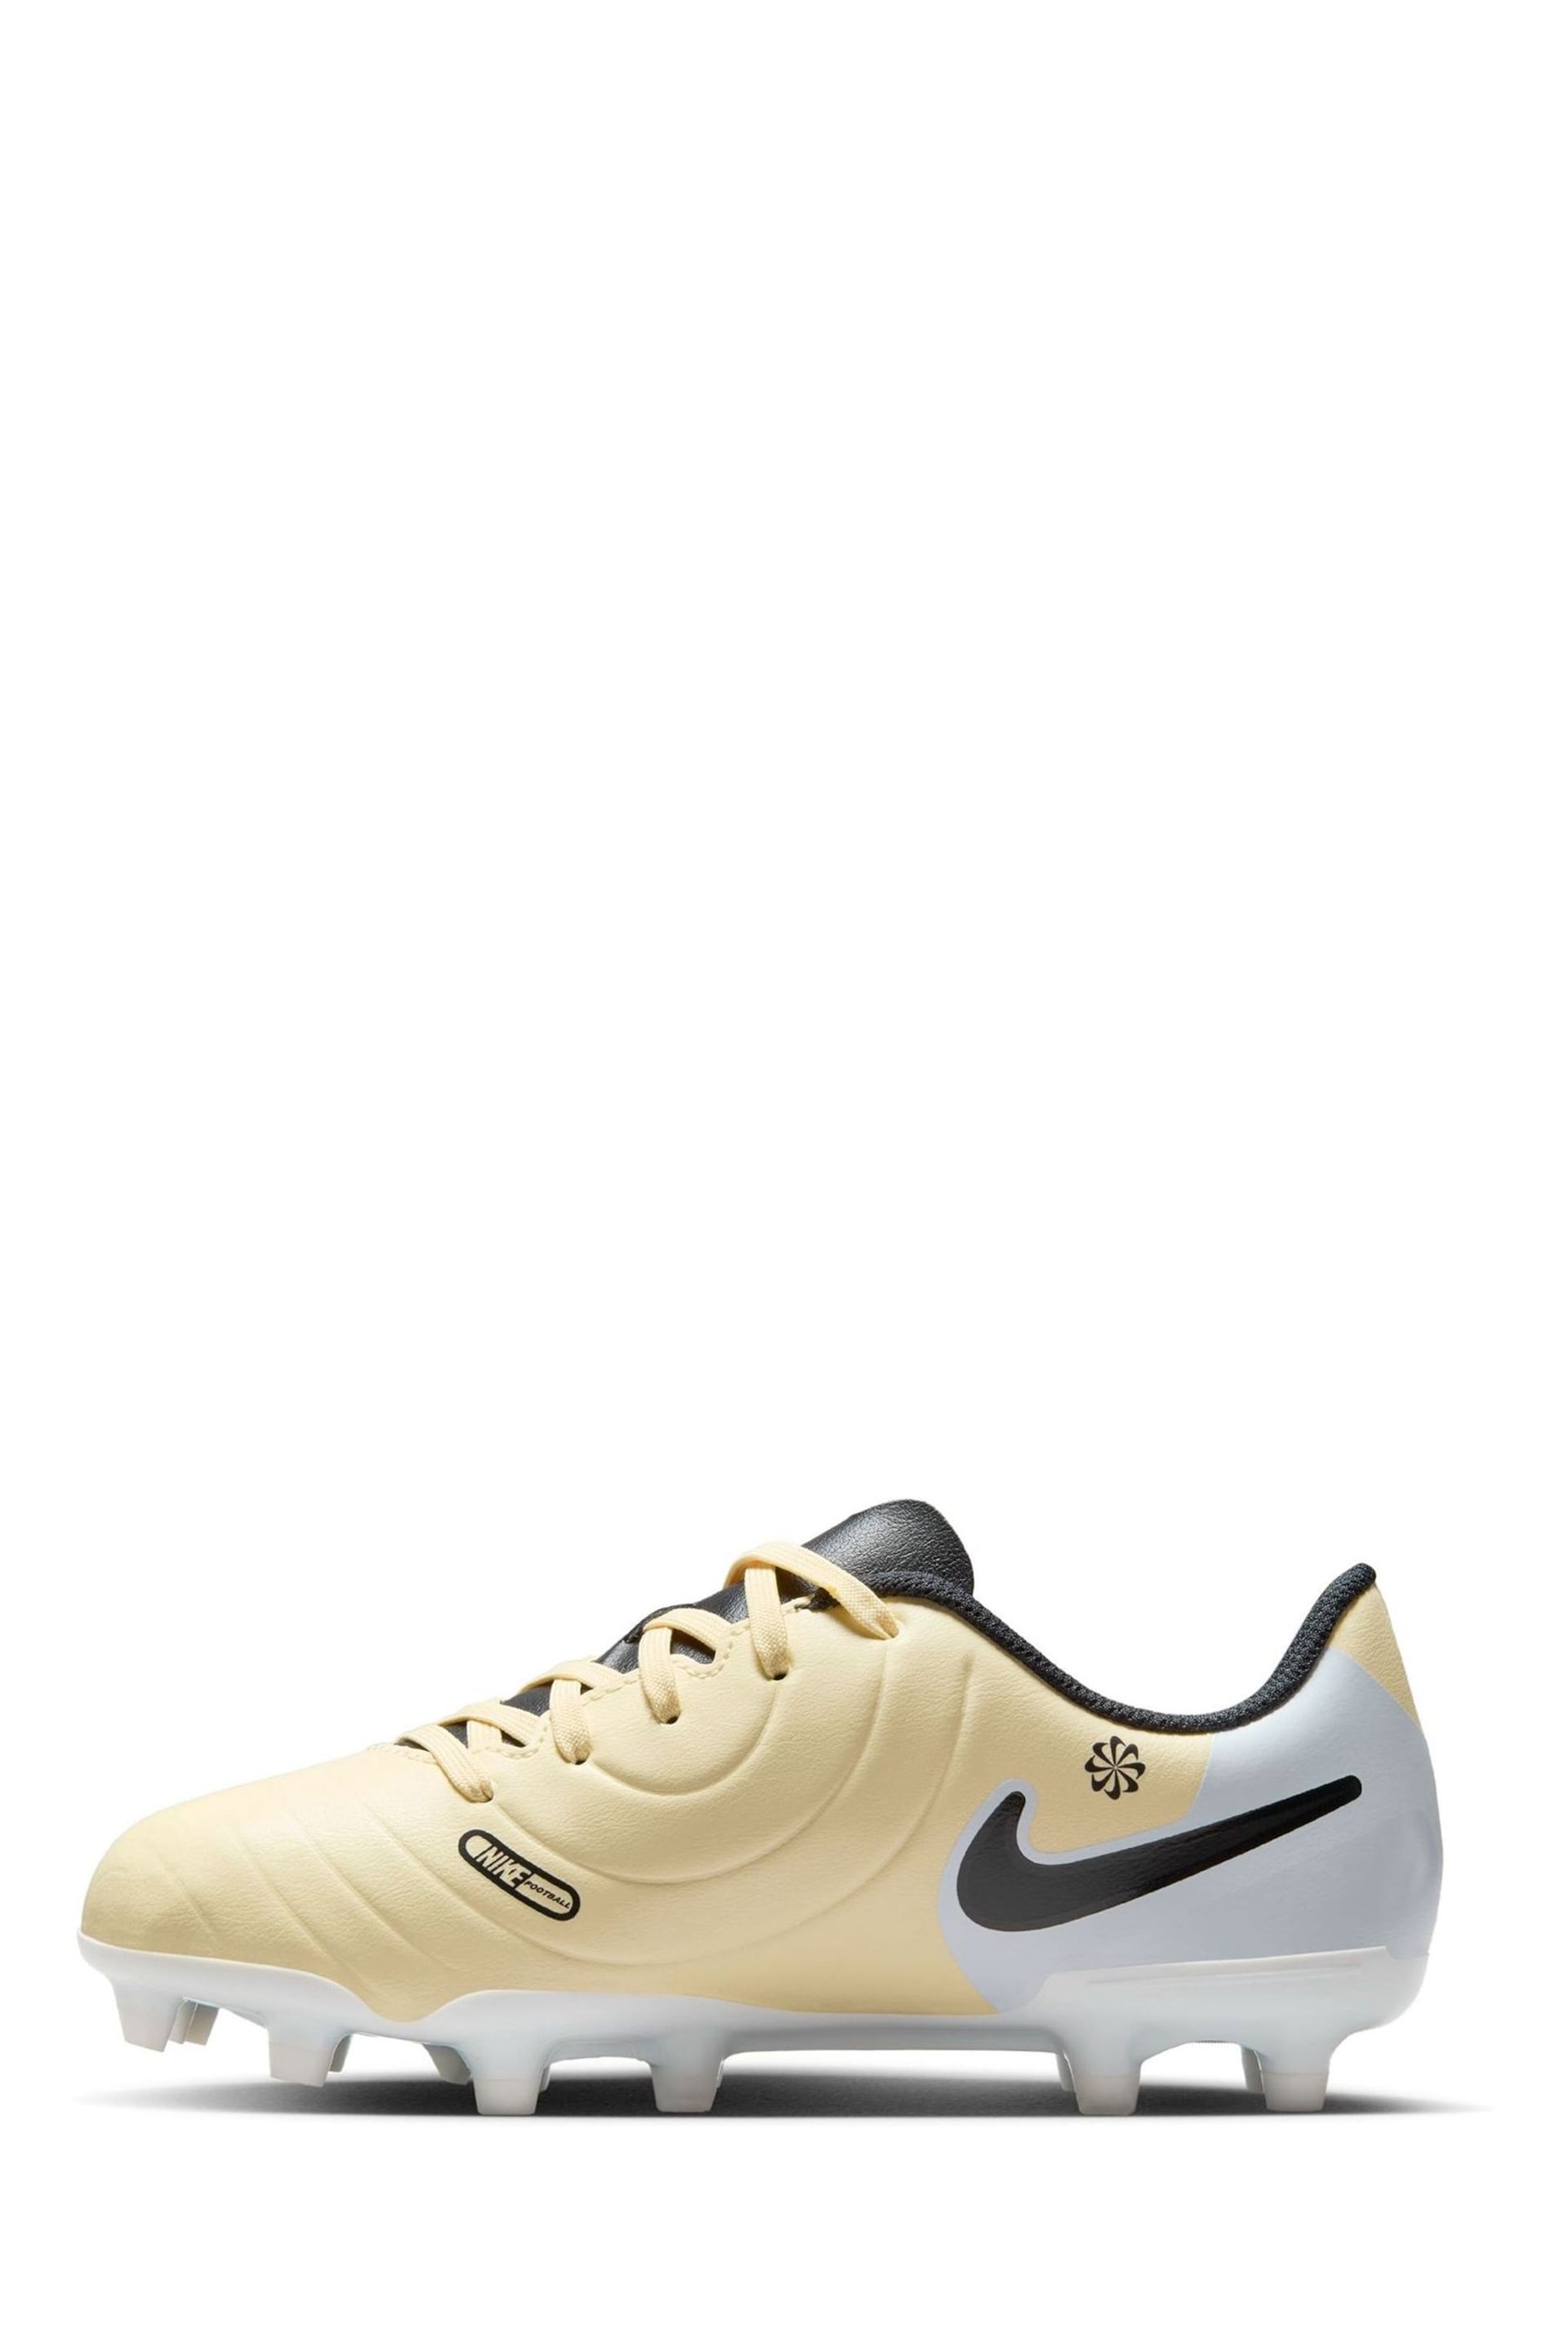 Nike Yellow Jr Tiempo Legend 10 Club Multi Ground Football Boots - Image 2 of 11